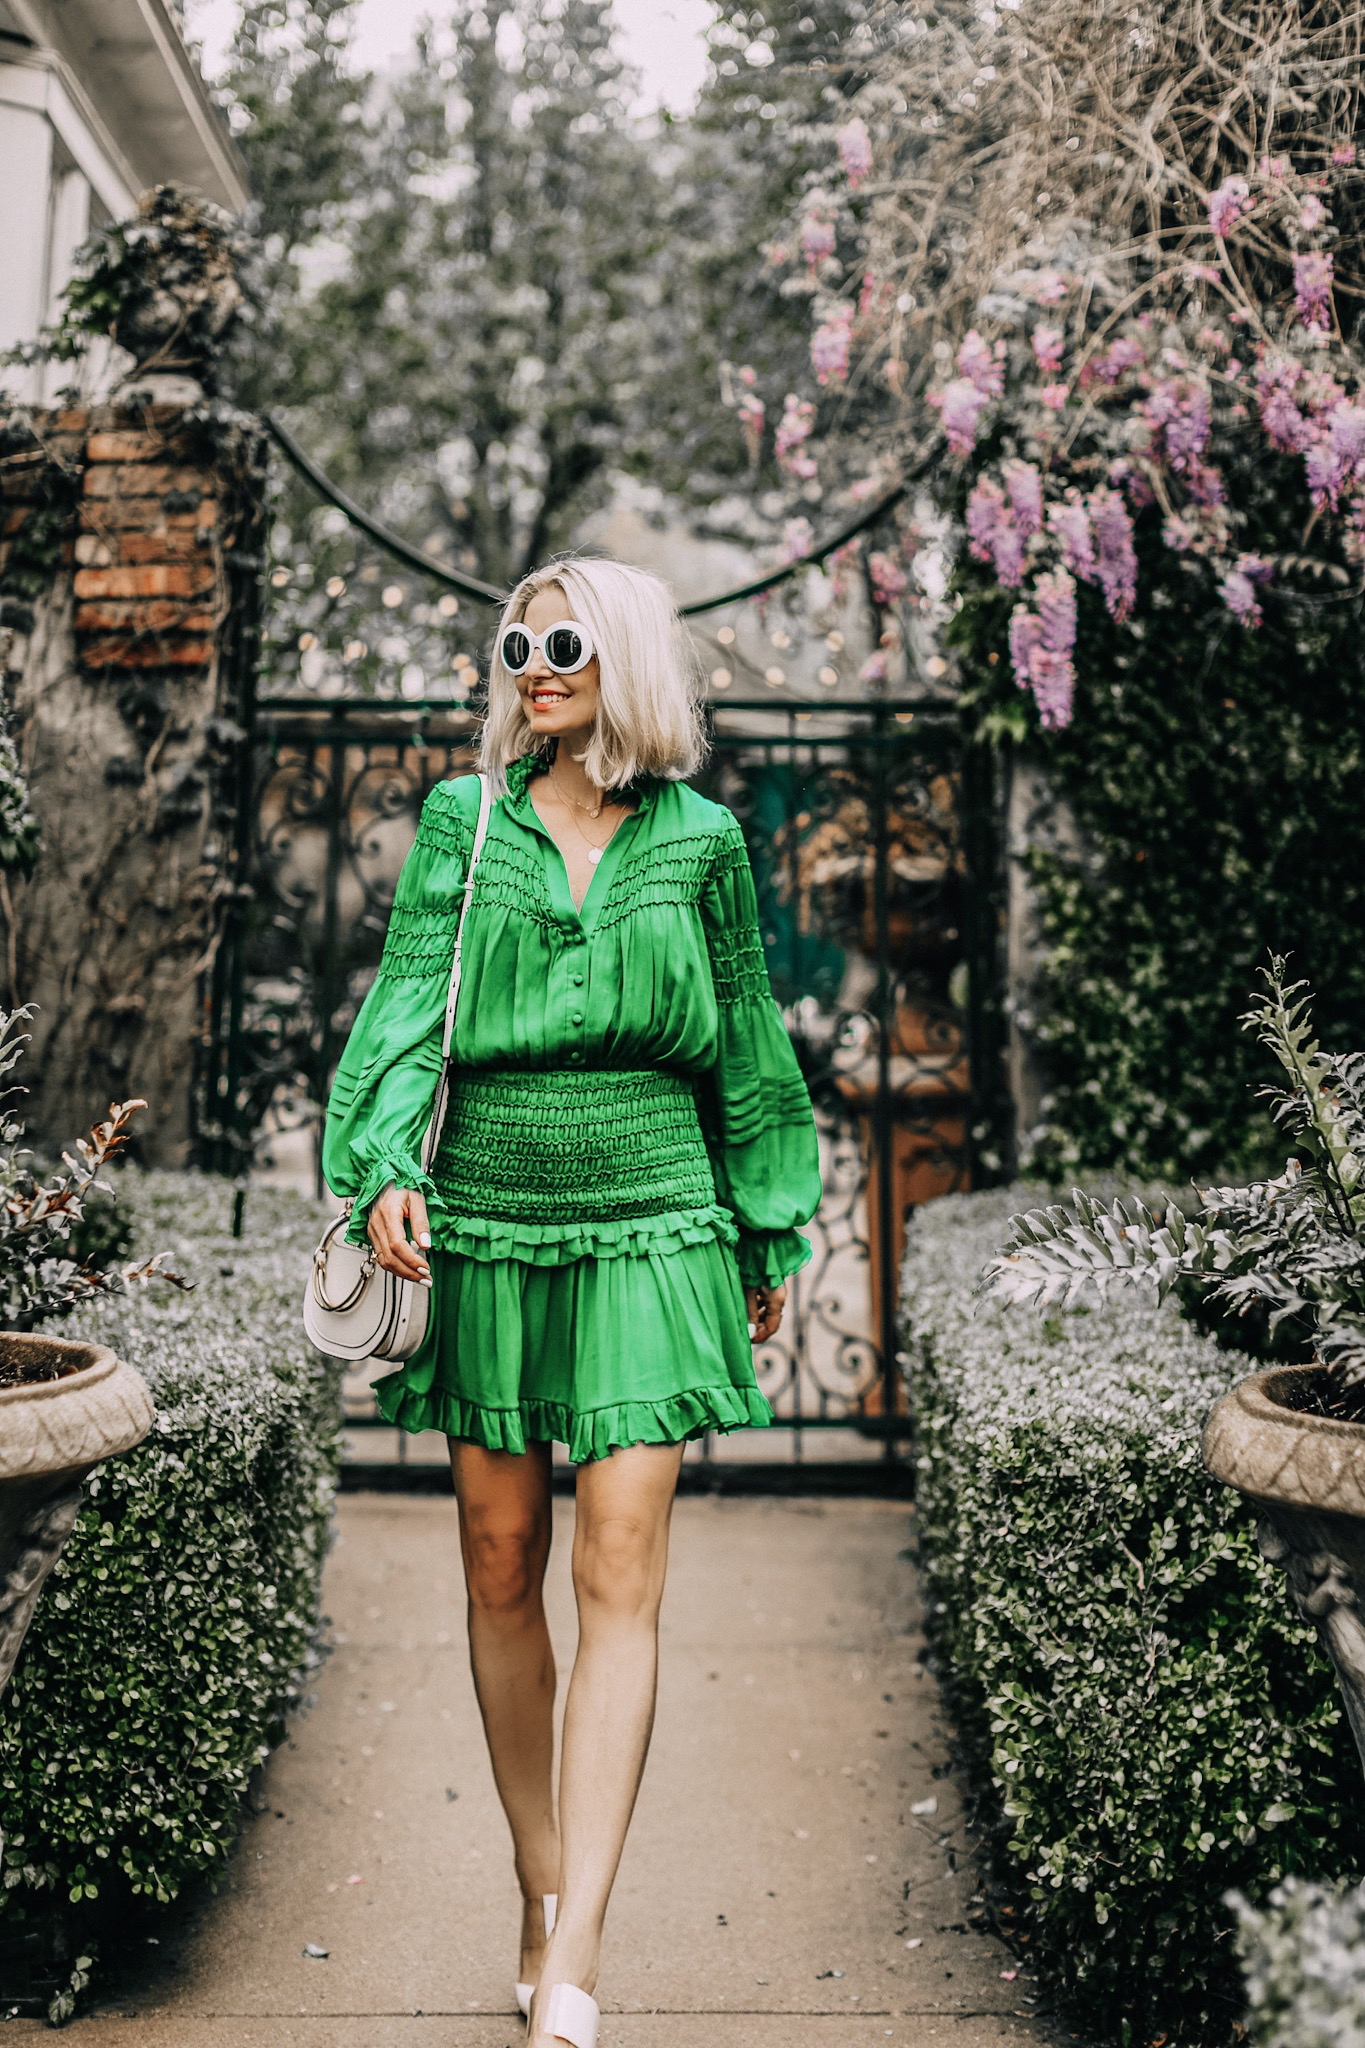 Green dress by Alexis on fashion over 40 blogger Erin Busbee